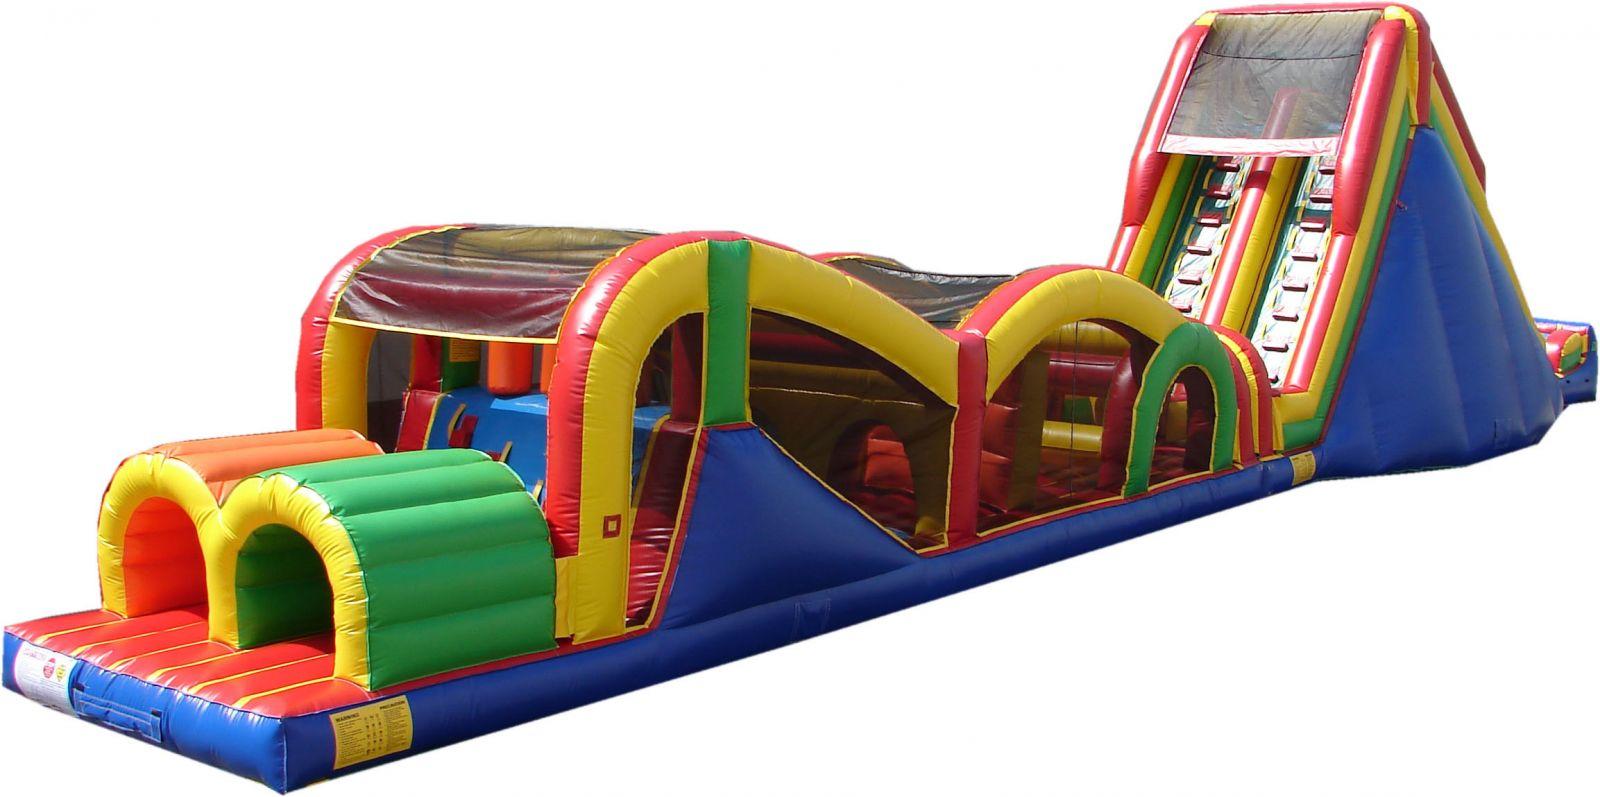 Inflatable Obstacle Course Rental in Golf